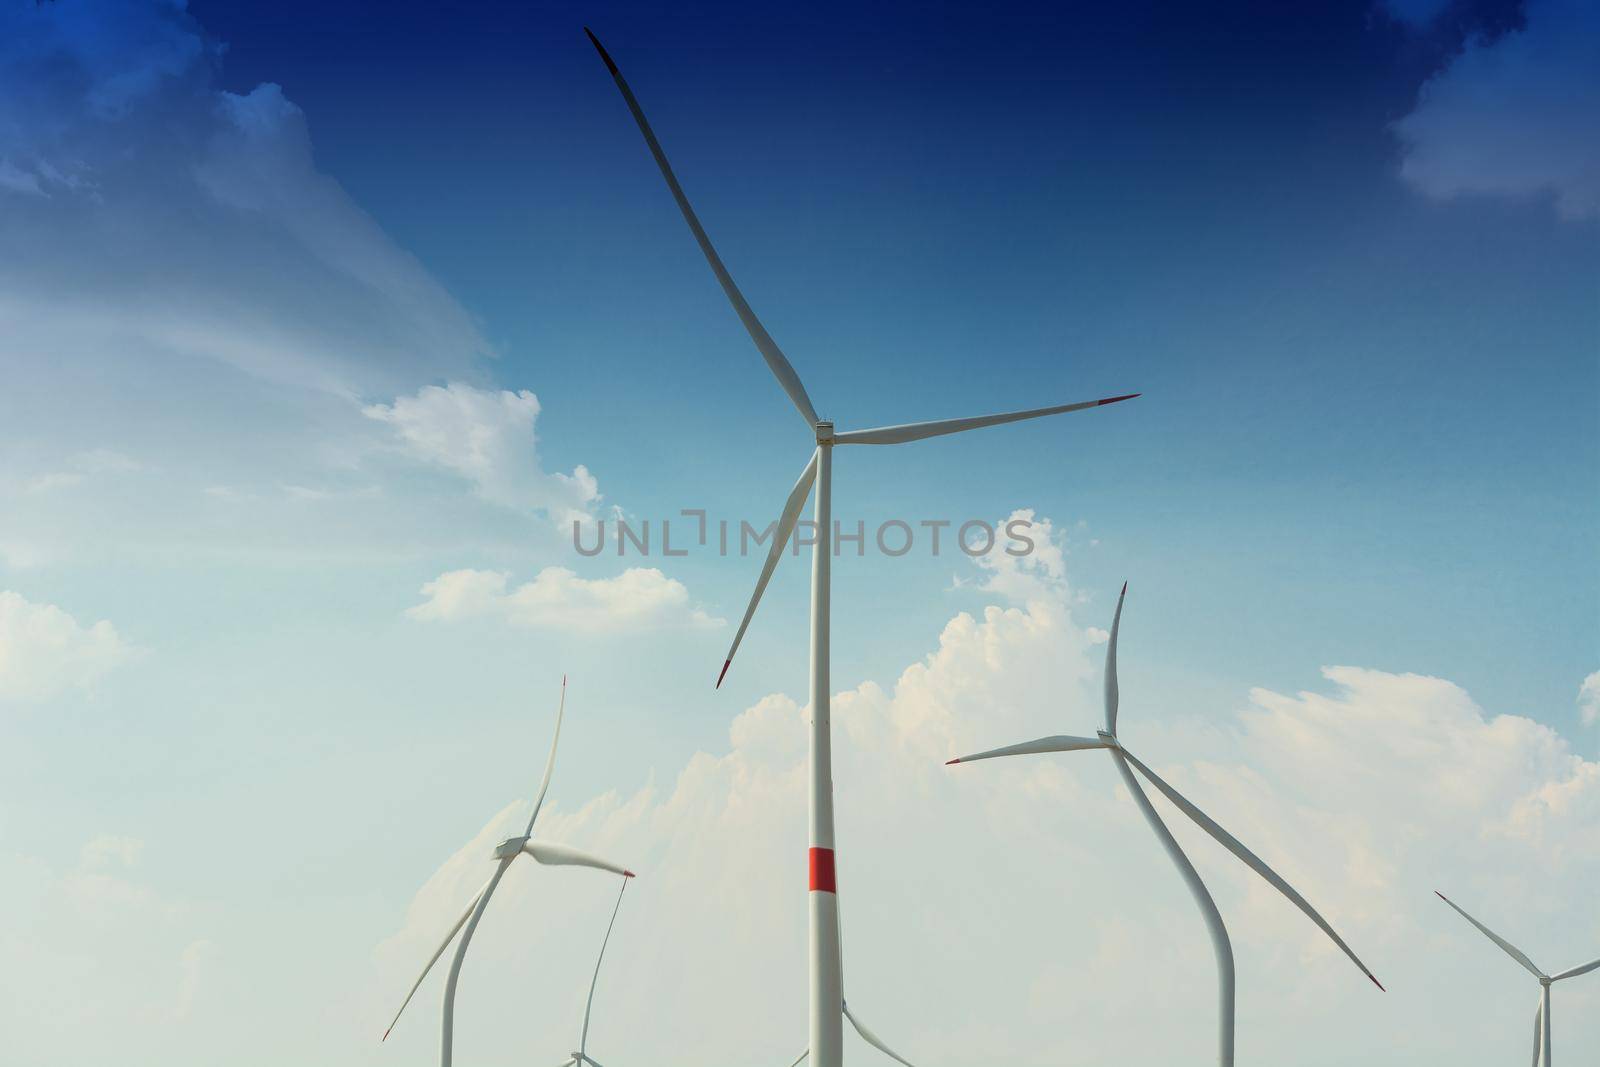 Wind generators recording with distortion filter by JFsPic